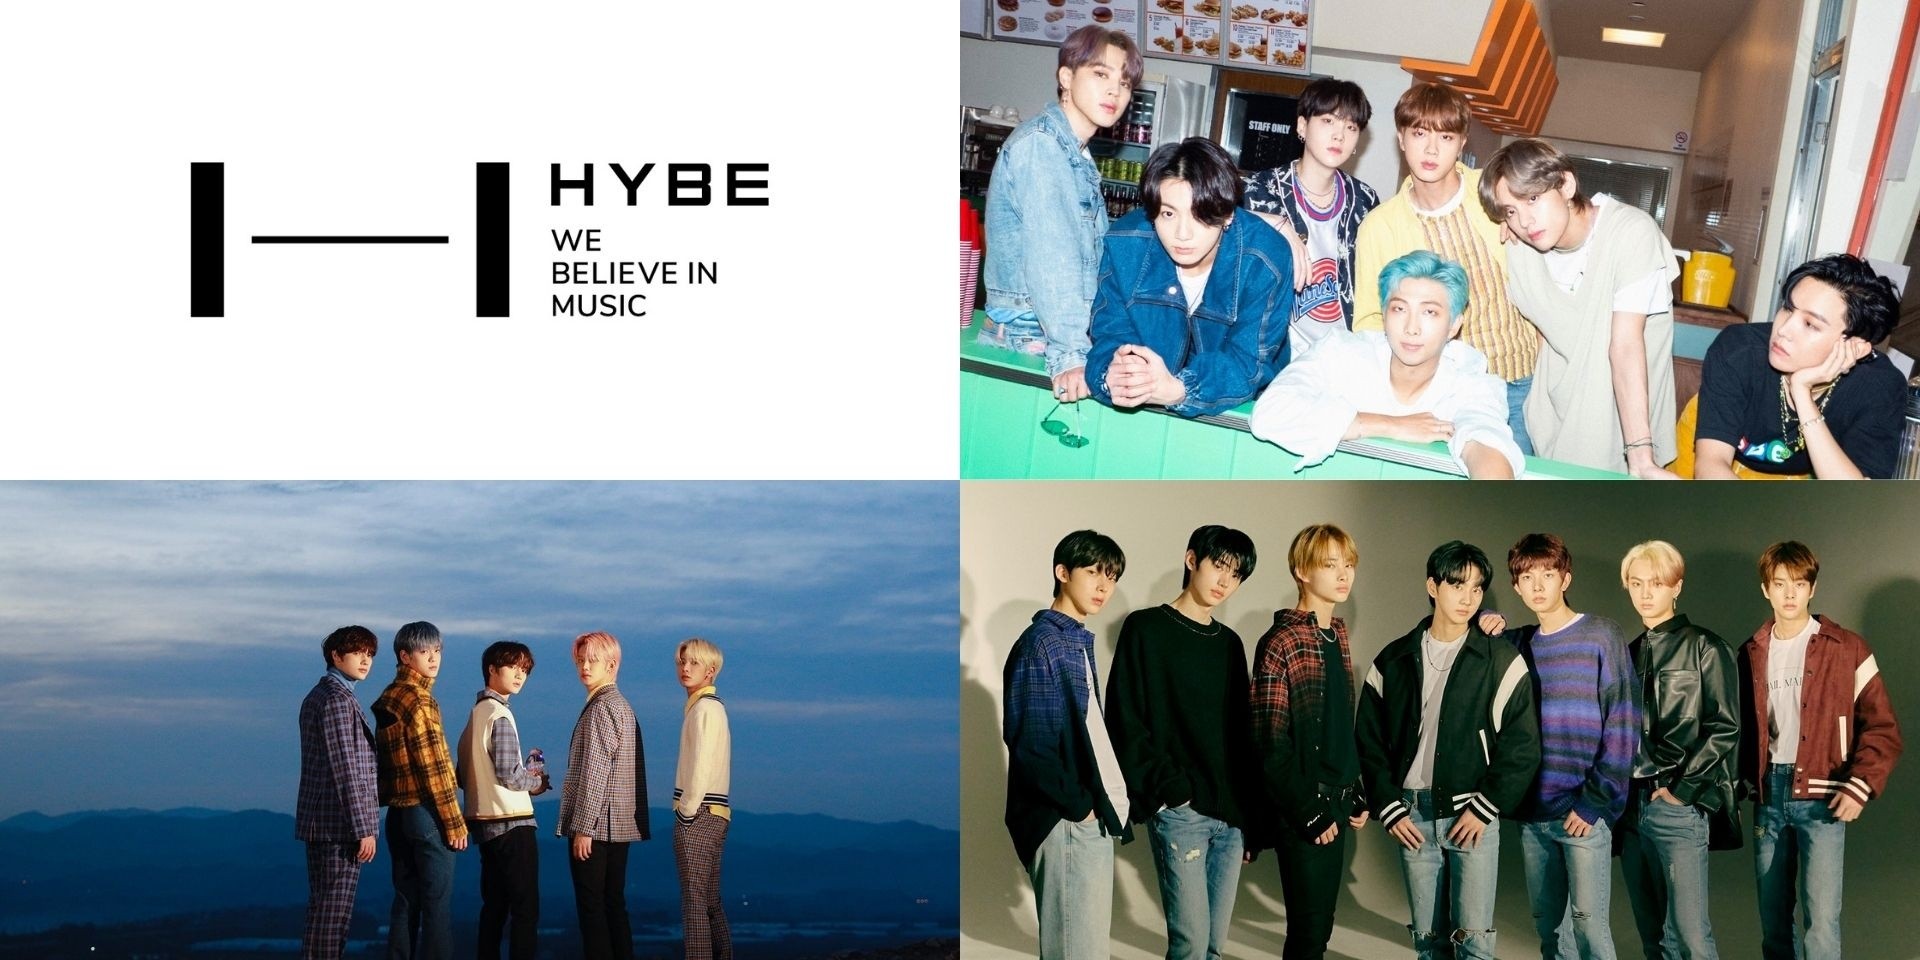 HYBE records more than 178 billion won in Q1 sales, 29% increase from 2020